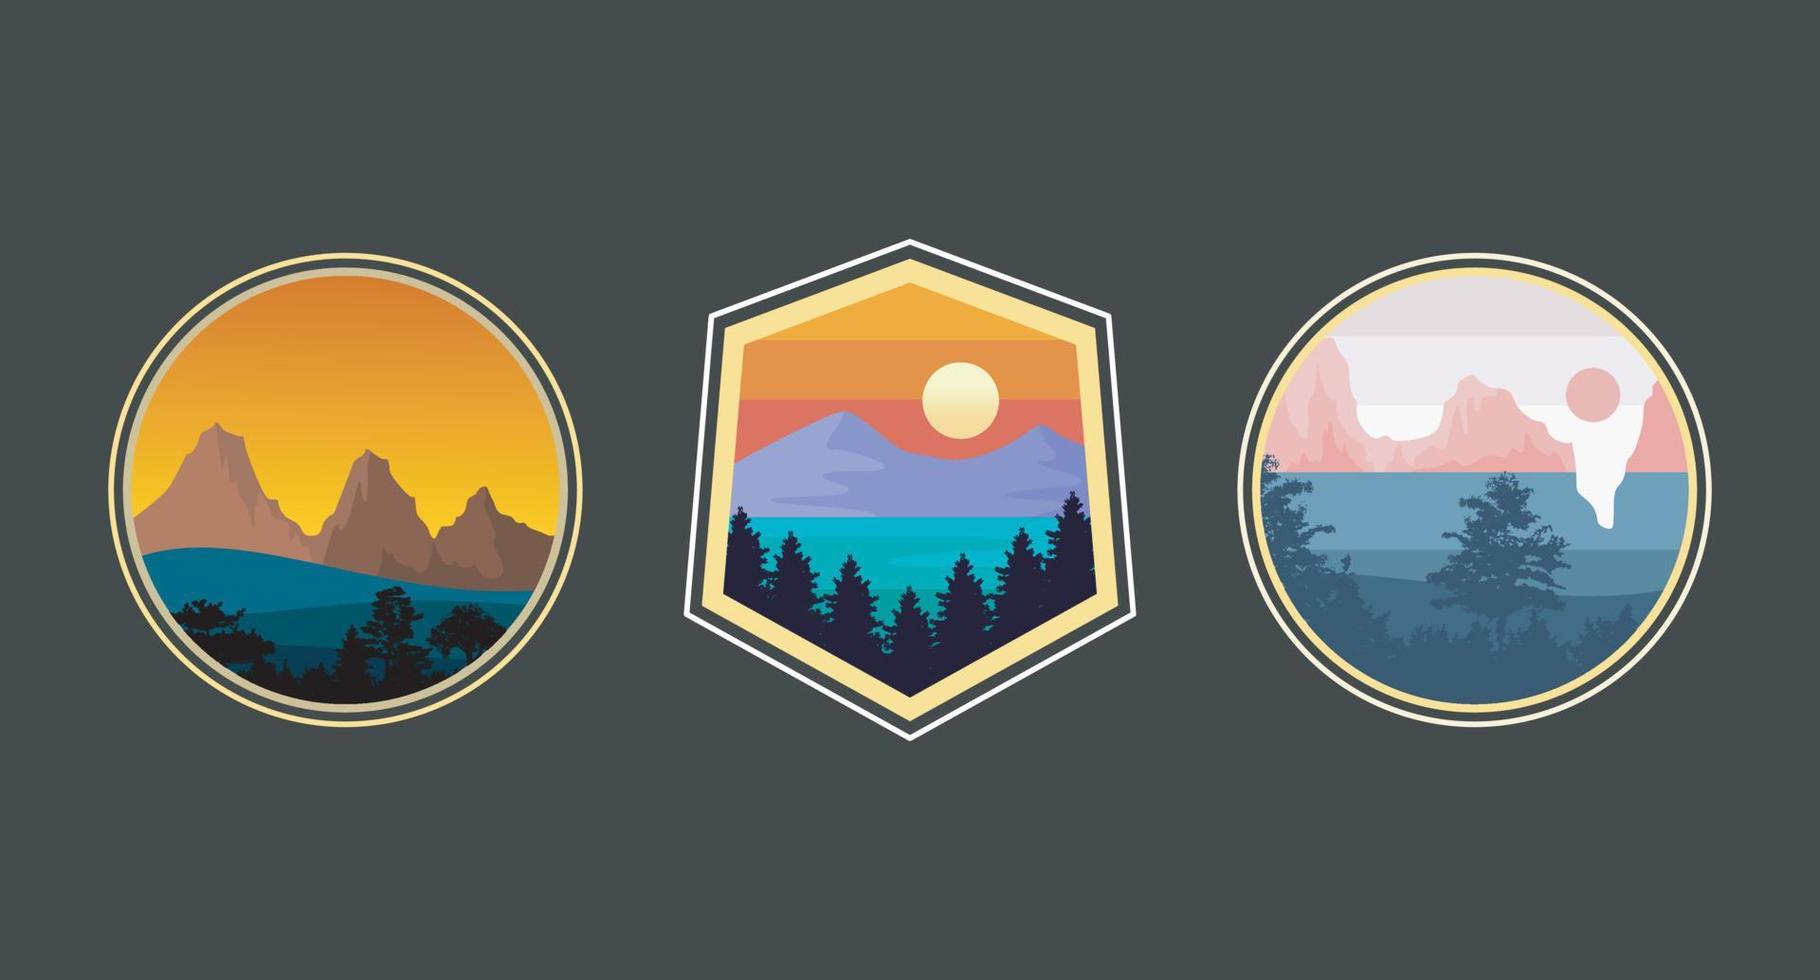 Retro style mountain design. Vector graphics for t shirts and other uses.